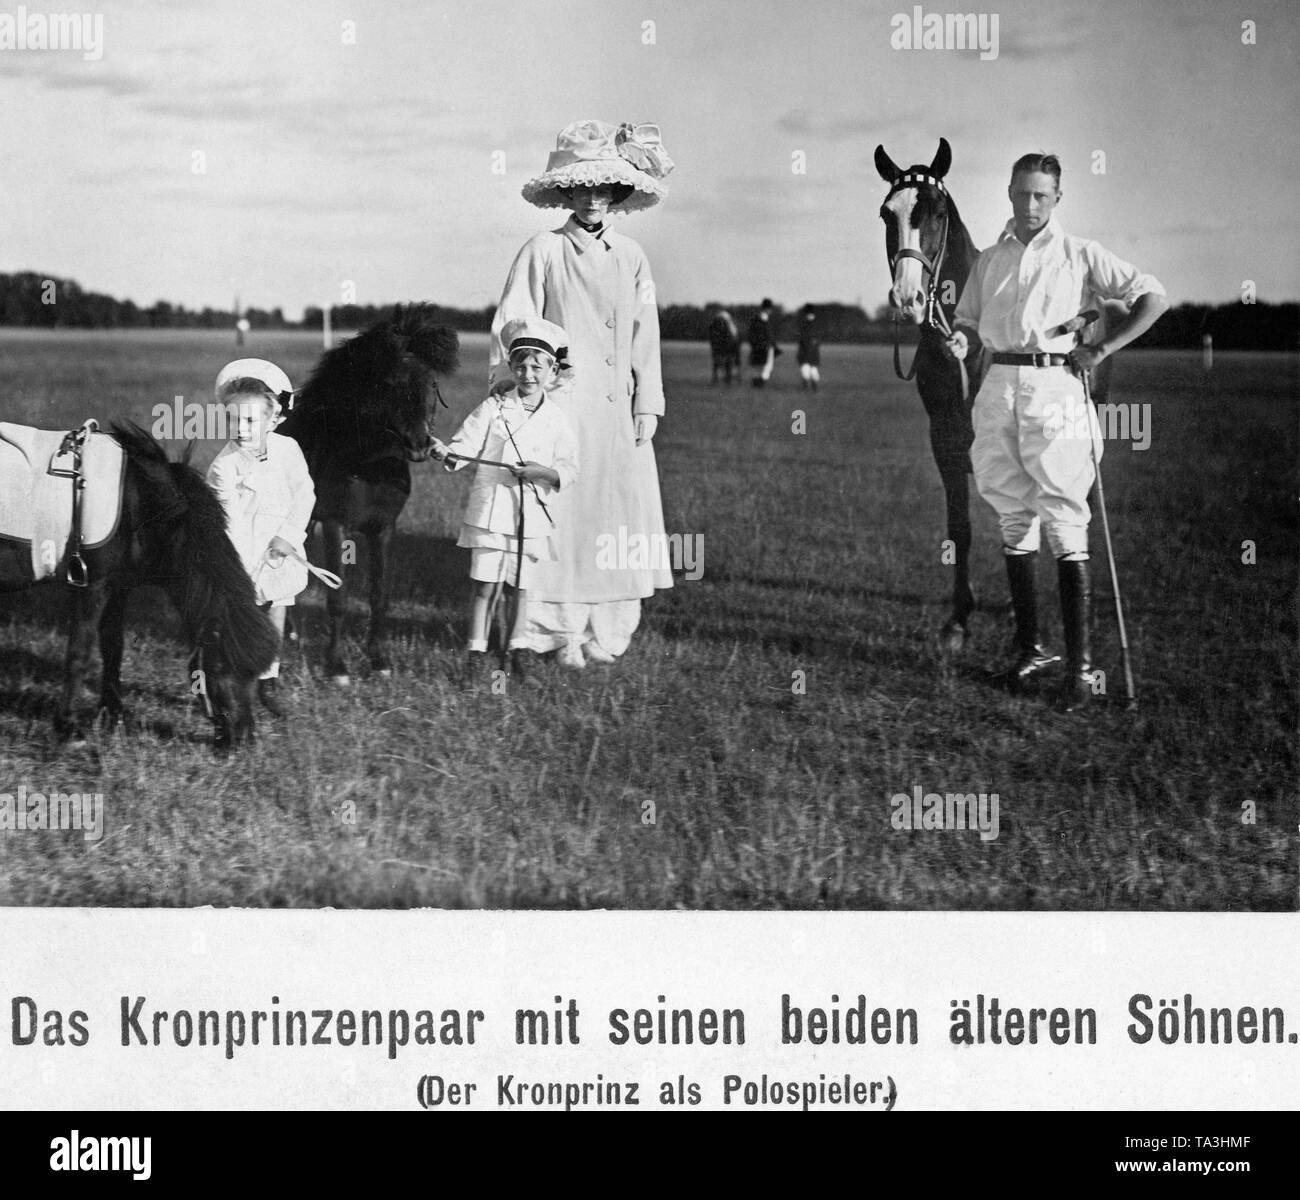 From left to right: Prince Louis Ferdinand, Prince William, Crown Princess Cecilie, Crown Prince Wilhelm.  The picture was made probably during a polo game of the Crown Prince. The two children steady their riding ponies while Crown Prince Wilhelm is dressed as a polo player and stands with a racket in his hand next to his horse. Stock Photo